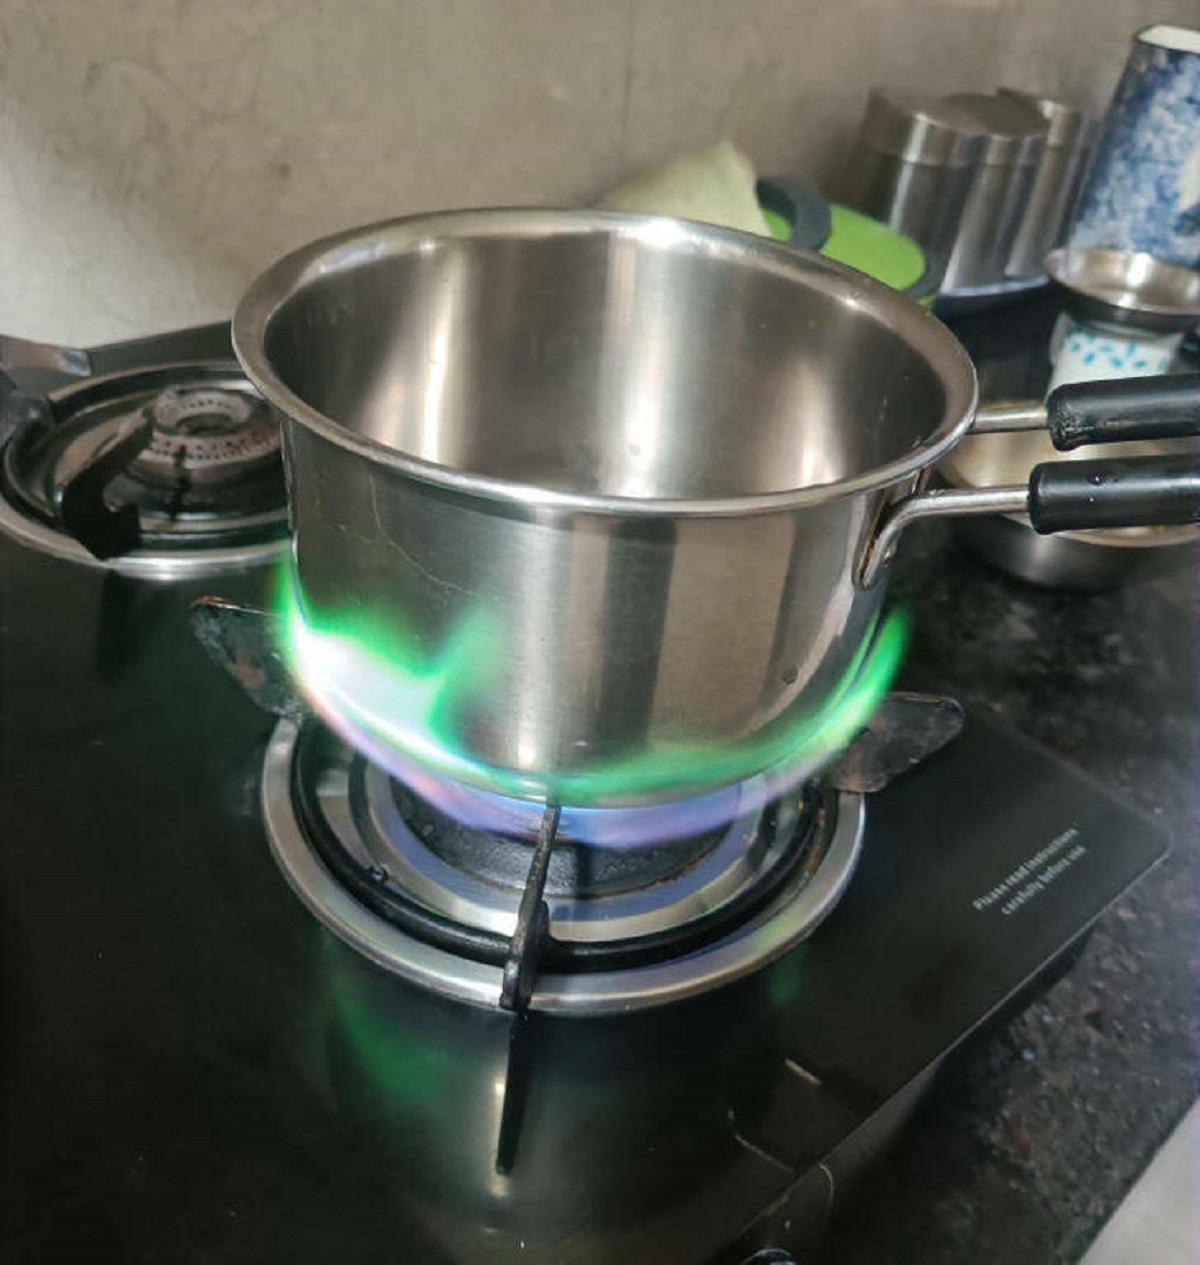 “The fire on my stove turned green.”